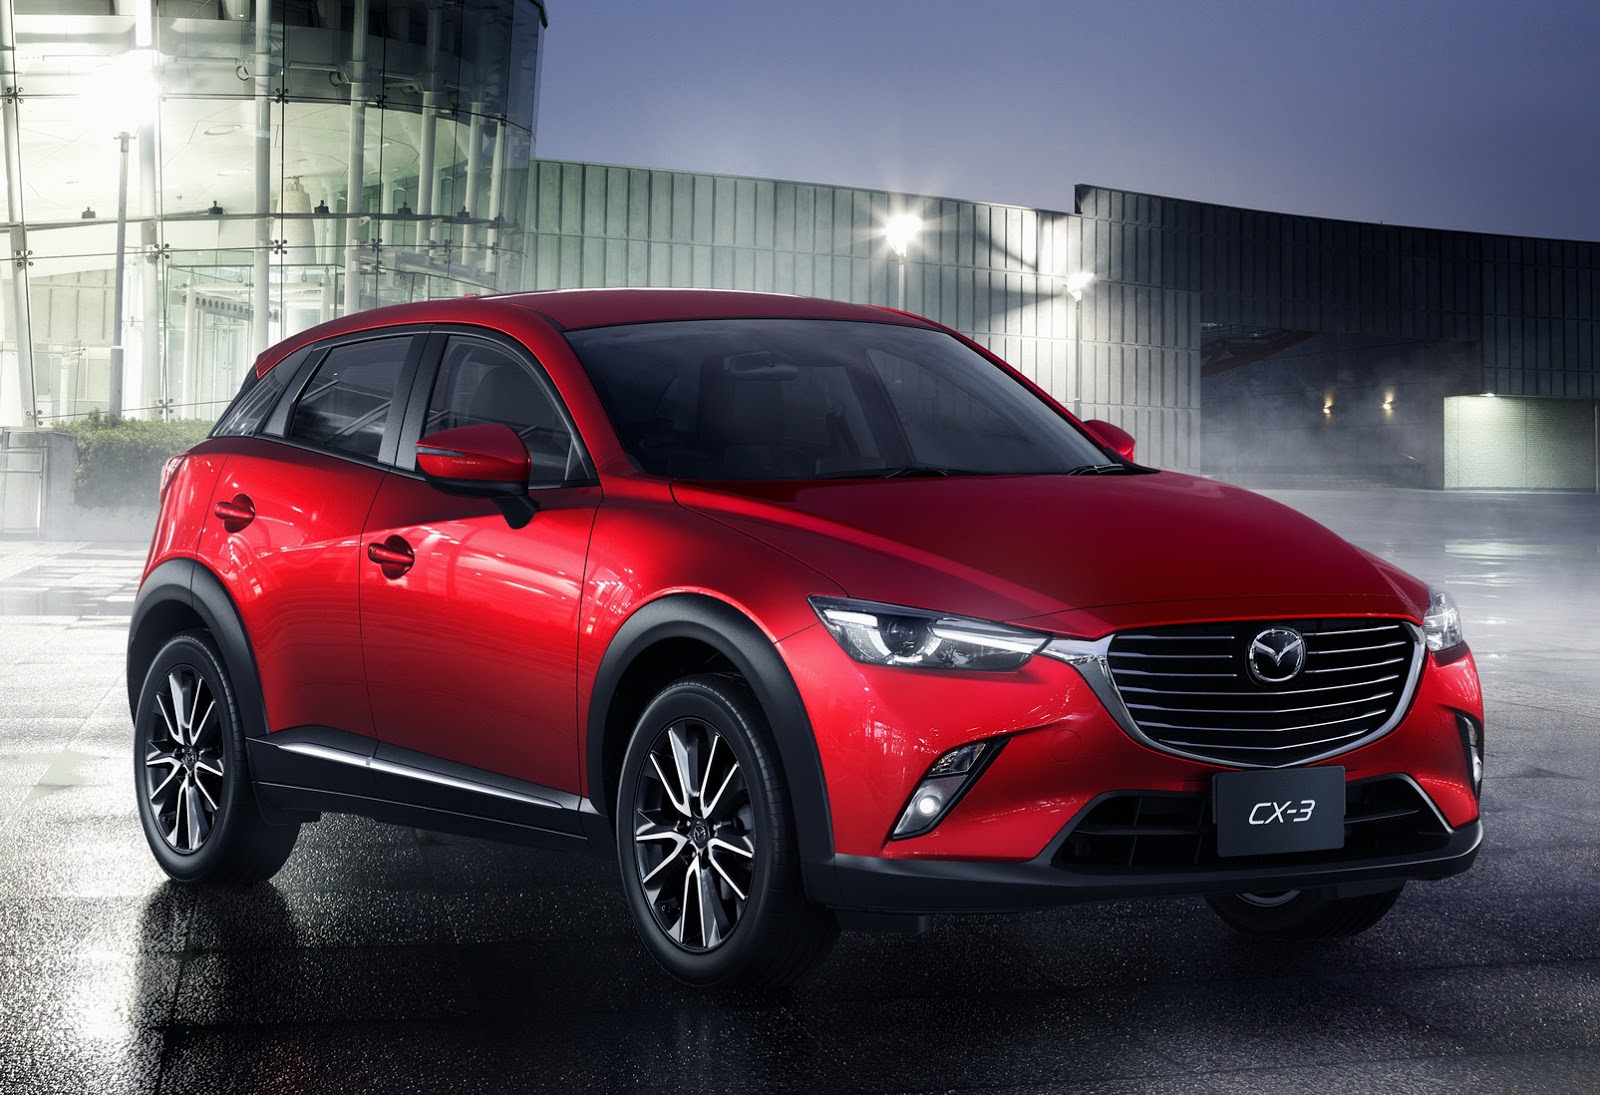 2016 Mazda CX-3 Crossover Looks Great from Every Angle ...